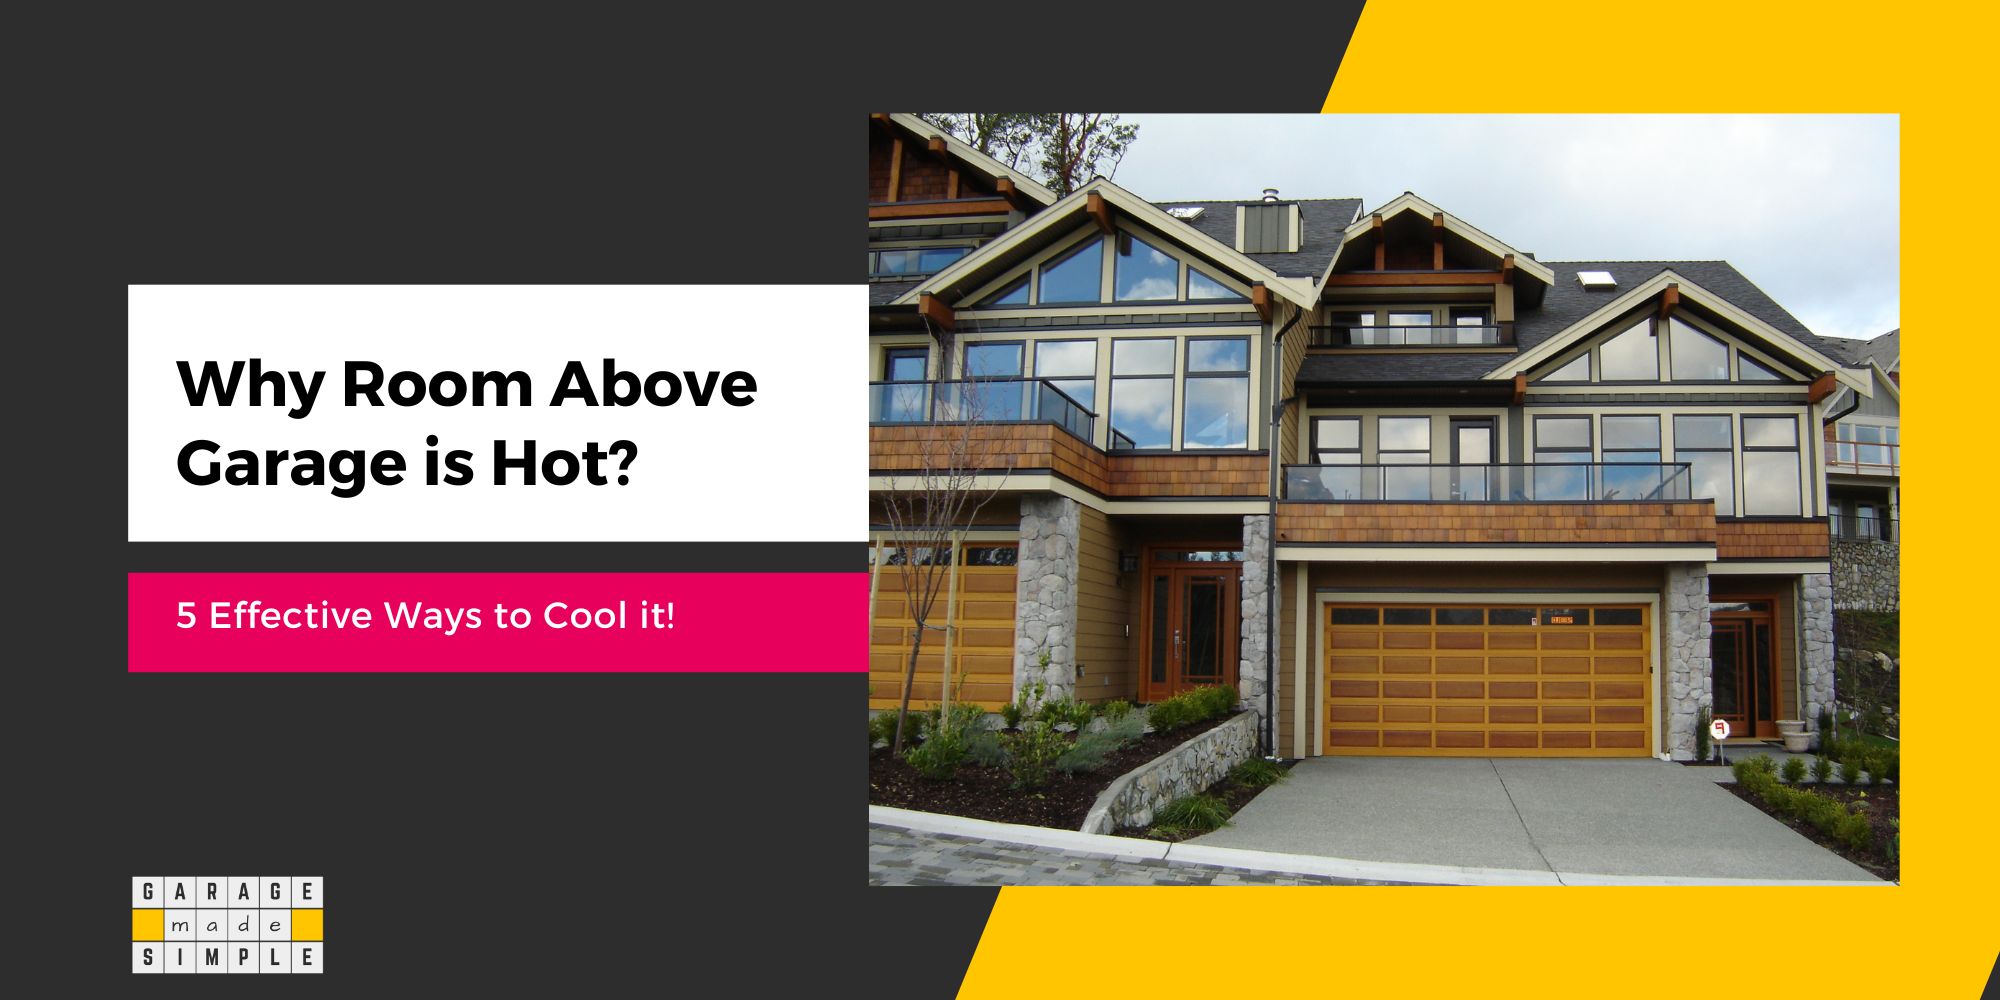 Room Above Garage Hot? (5 Effective Ways to Cool It!)